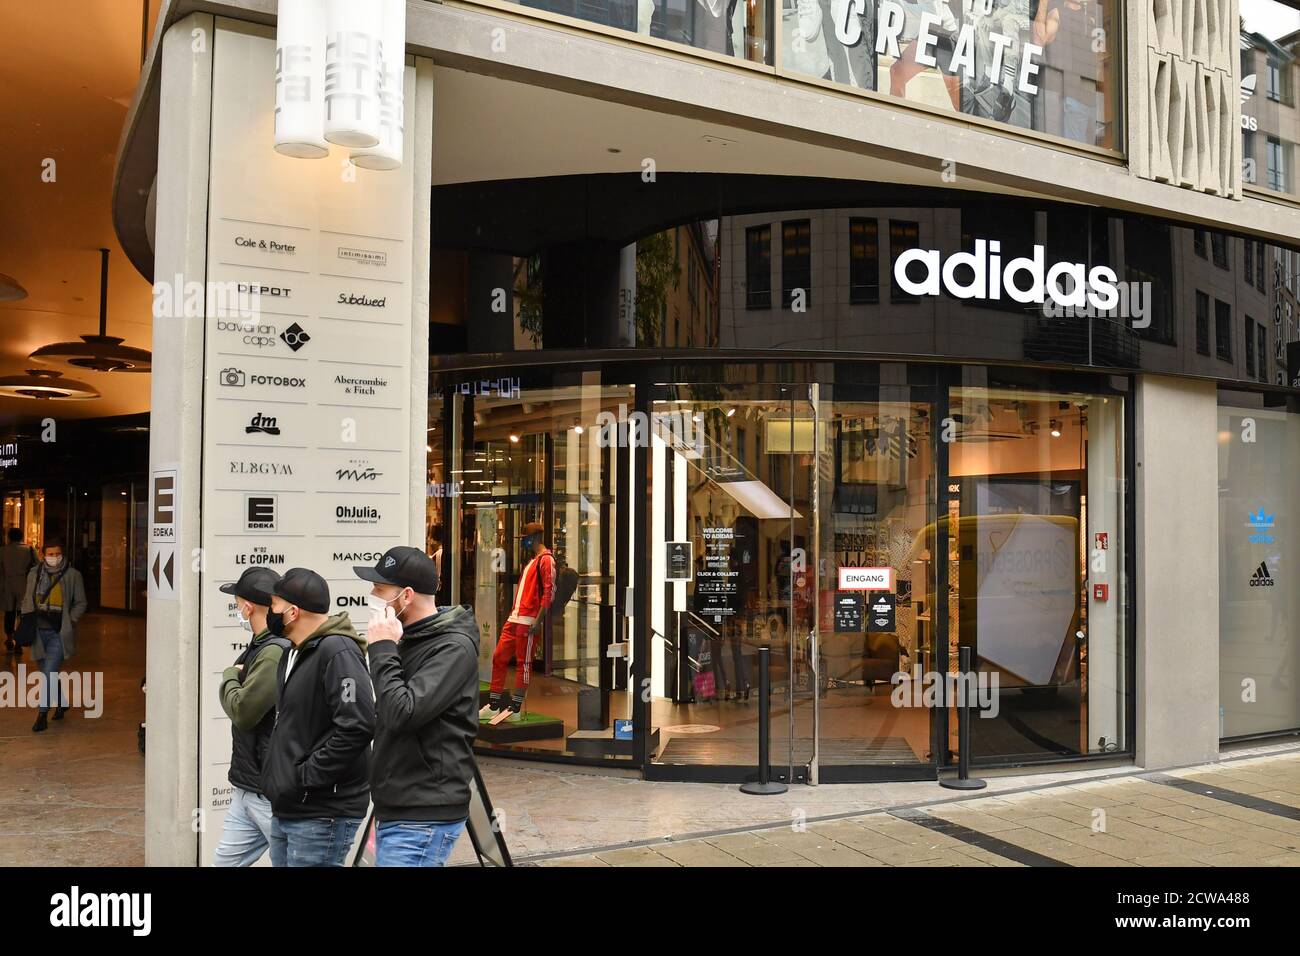 Benigno Lo siento Lío Exterior view of an adidas store, flagship store in Sendlinger Strasse in  Muenchen, sporting goods manufacturer, | usage worldwide Stock Photo - Alamy